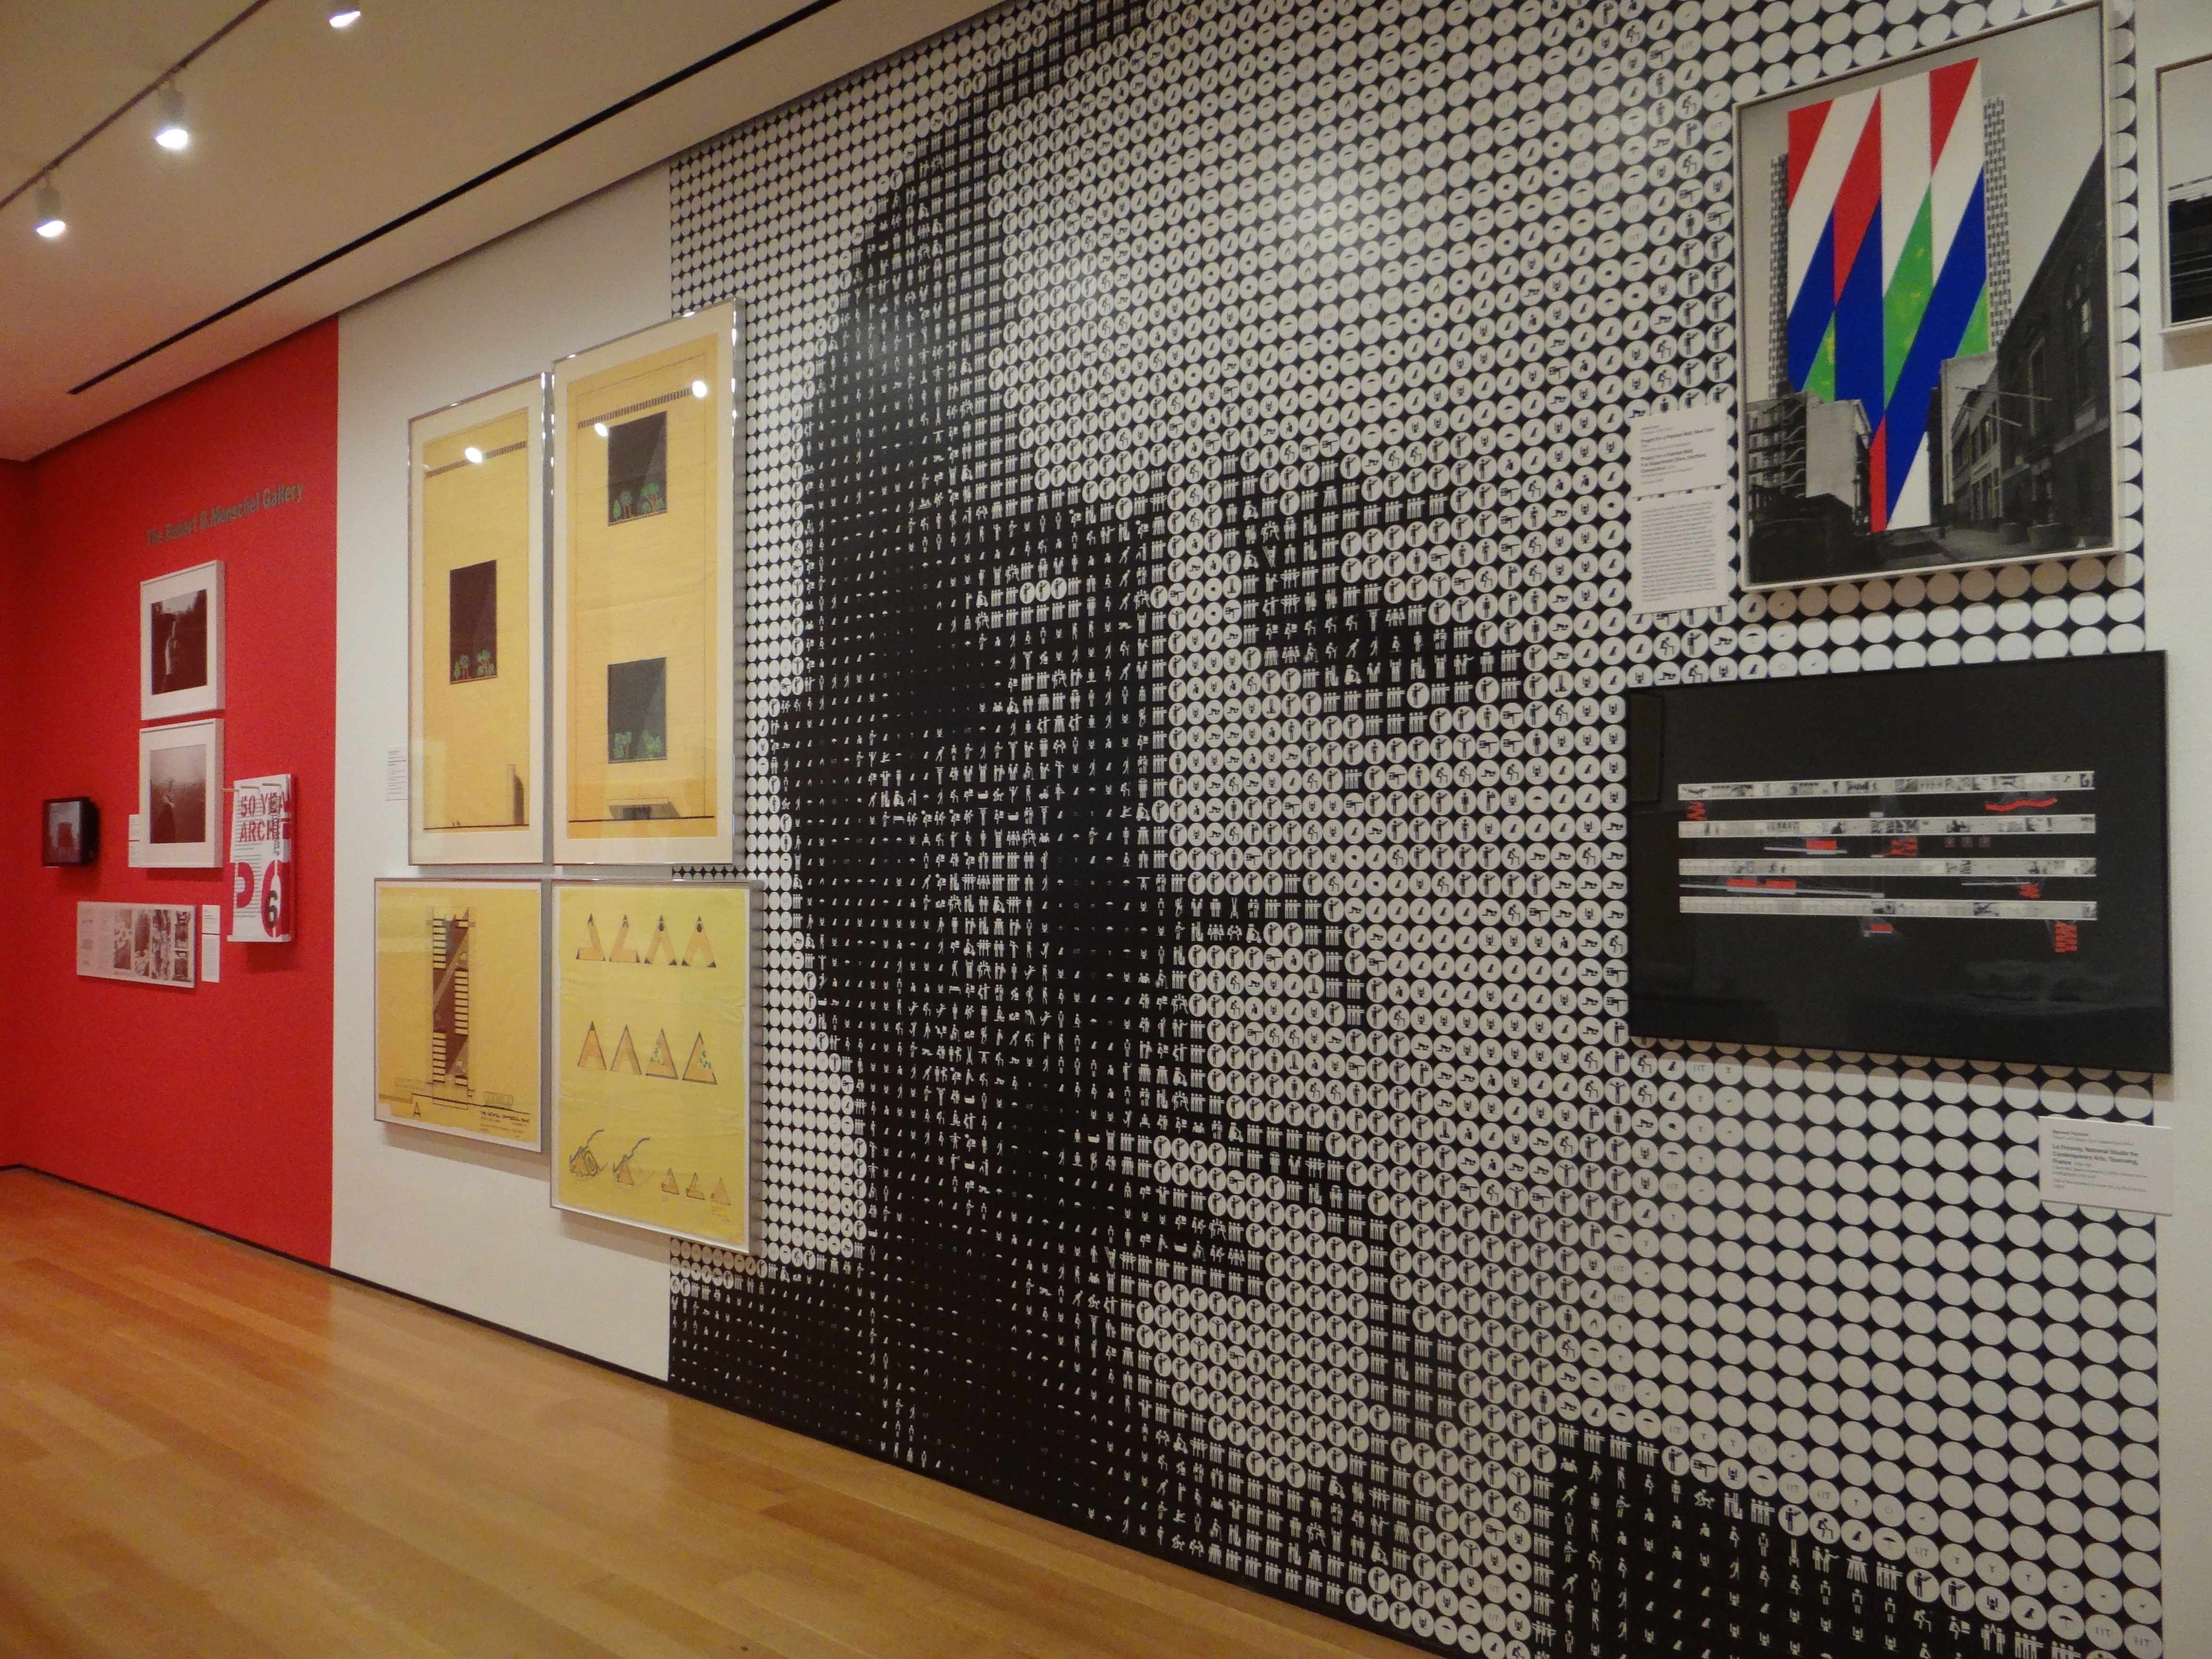 Mies exhibition at MoMA. Large format digitally printed wallpaper, print and installation by Color X .